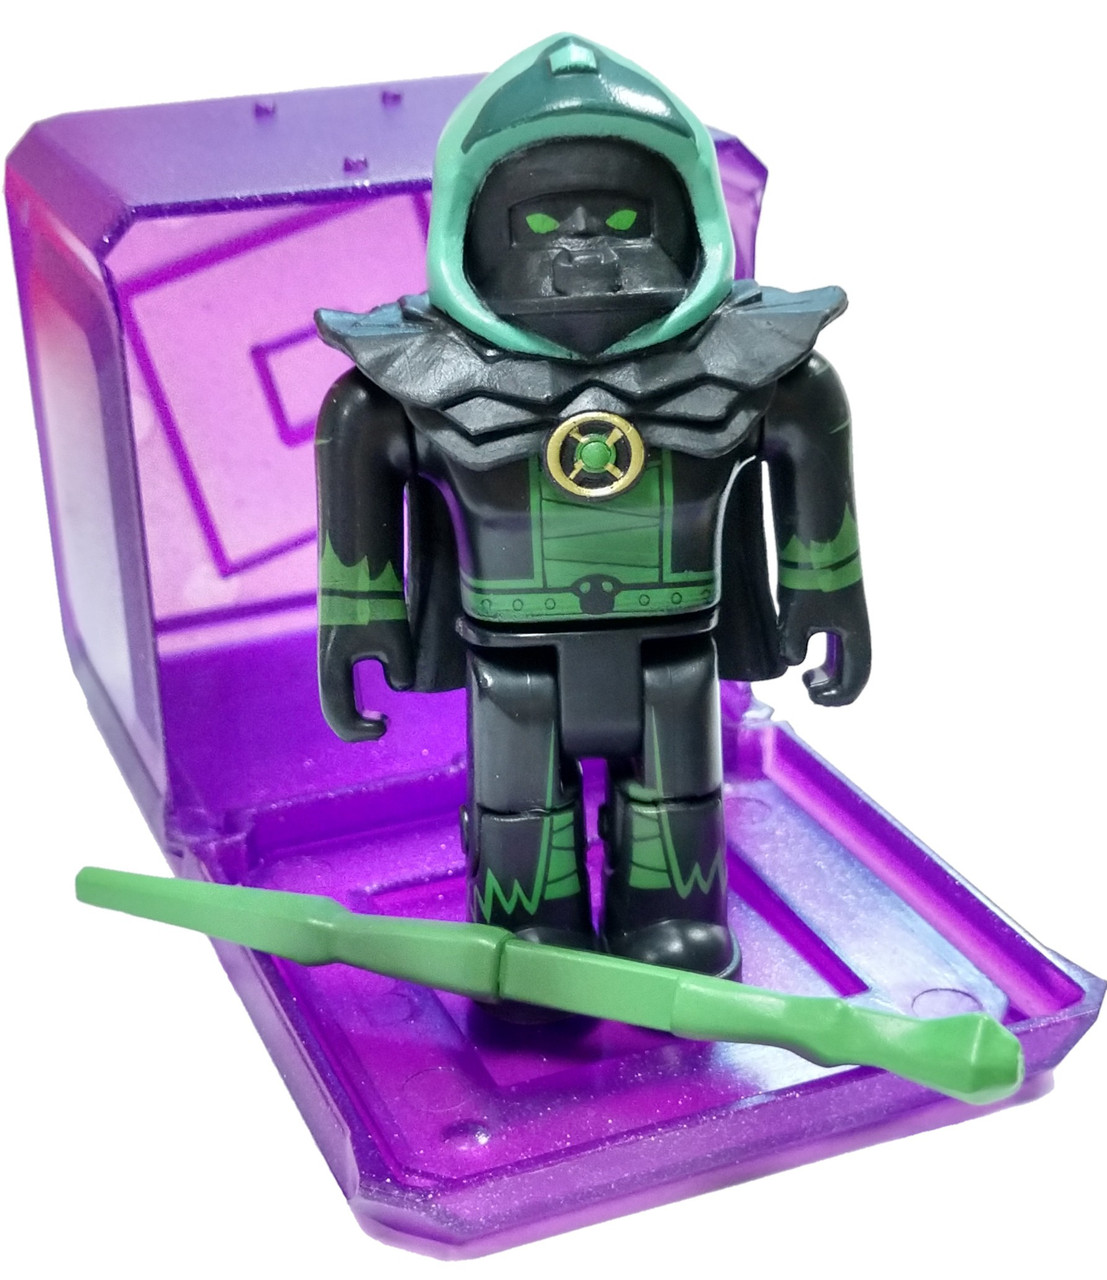 Roblox Celebrity Collection Series 3 Sethalonian 3 Mini Figure With Cube And Online Code Loose Jazwares Toywiz - details about roblox series 3 book of monsters minotaur with code